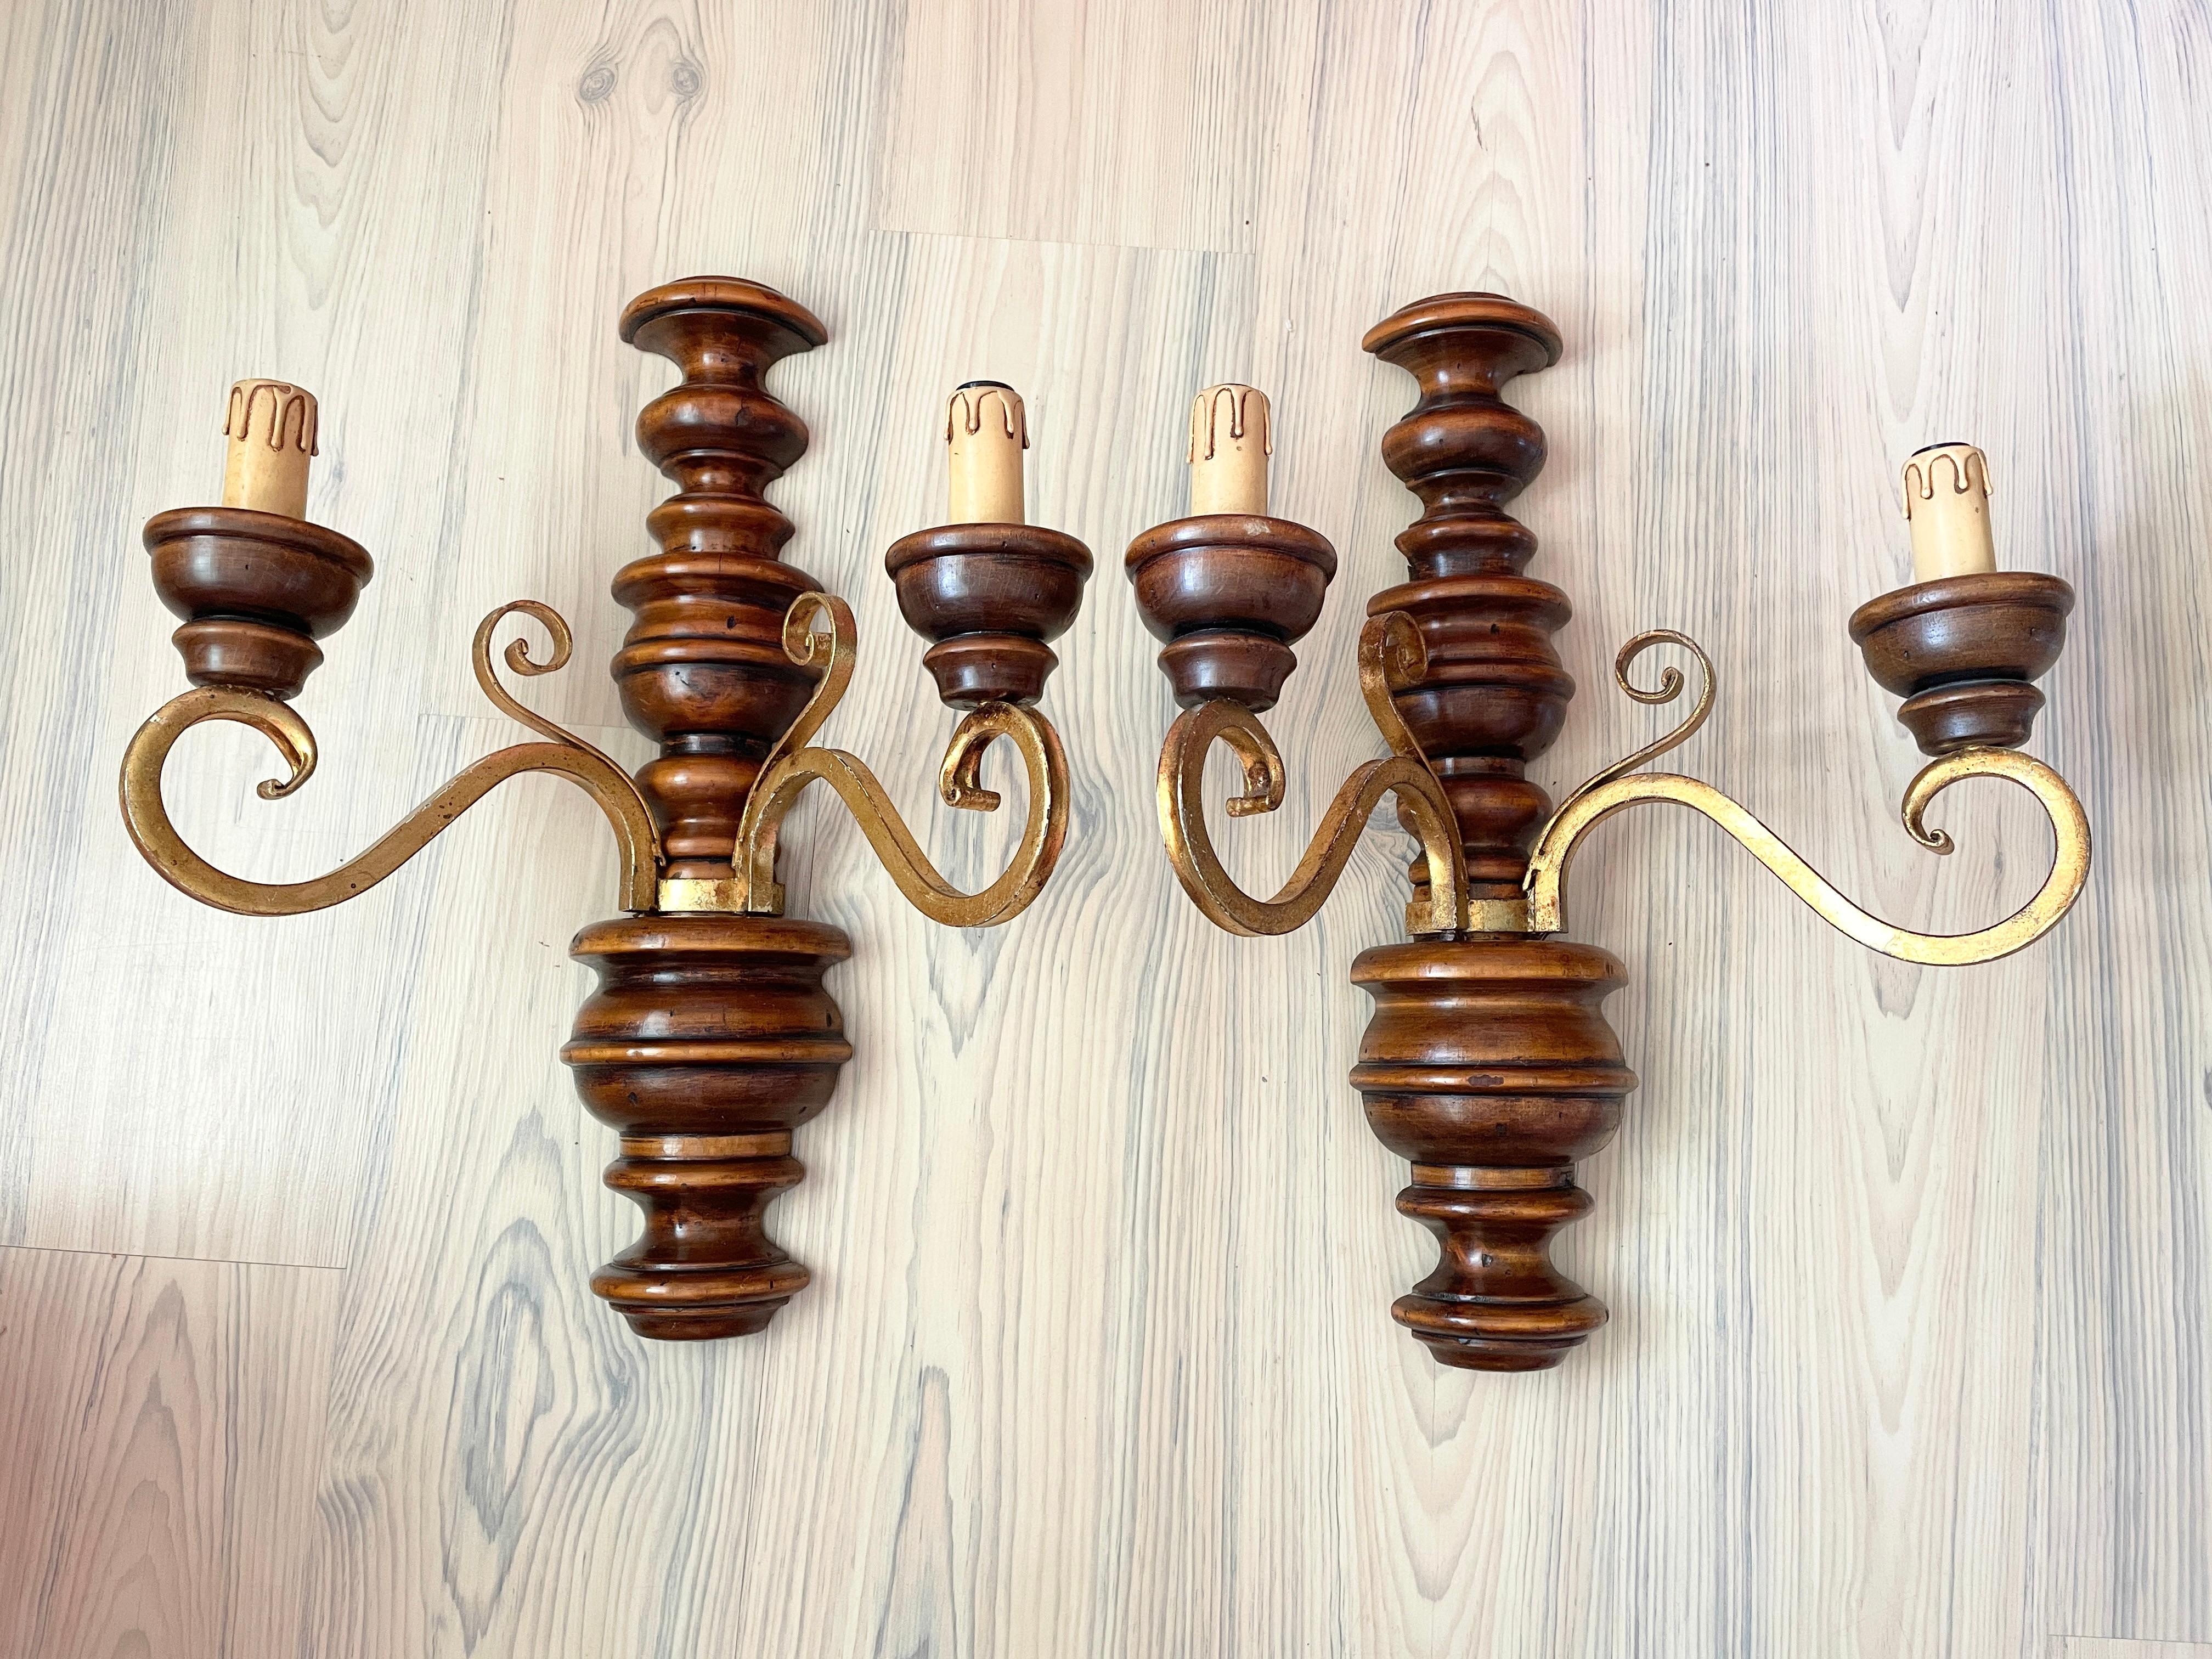 A pair rustic wood and gilt metal Sconces, each fixture requires two European E14 candelabra bulbs, each up to 40 watts. The wall lights have a beautiful patina and give each room a eclectic statement.